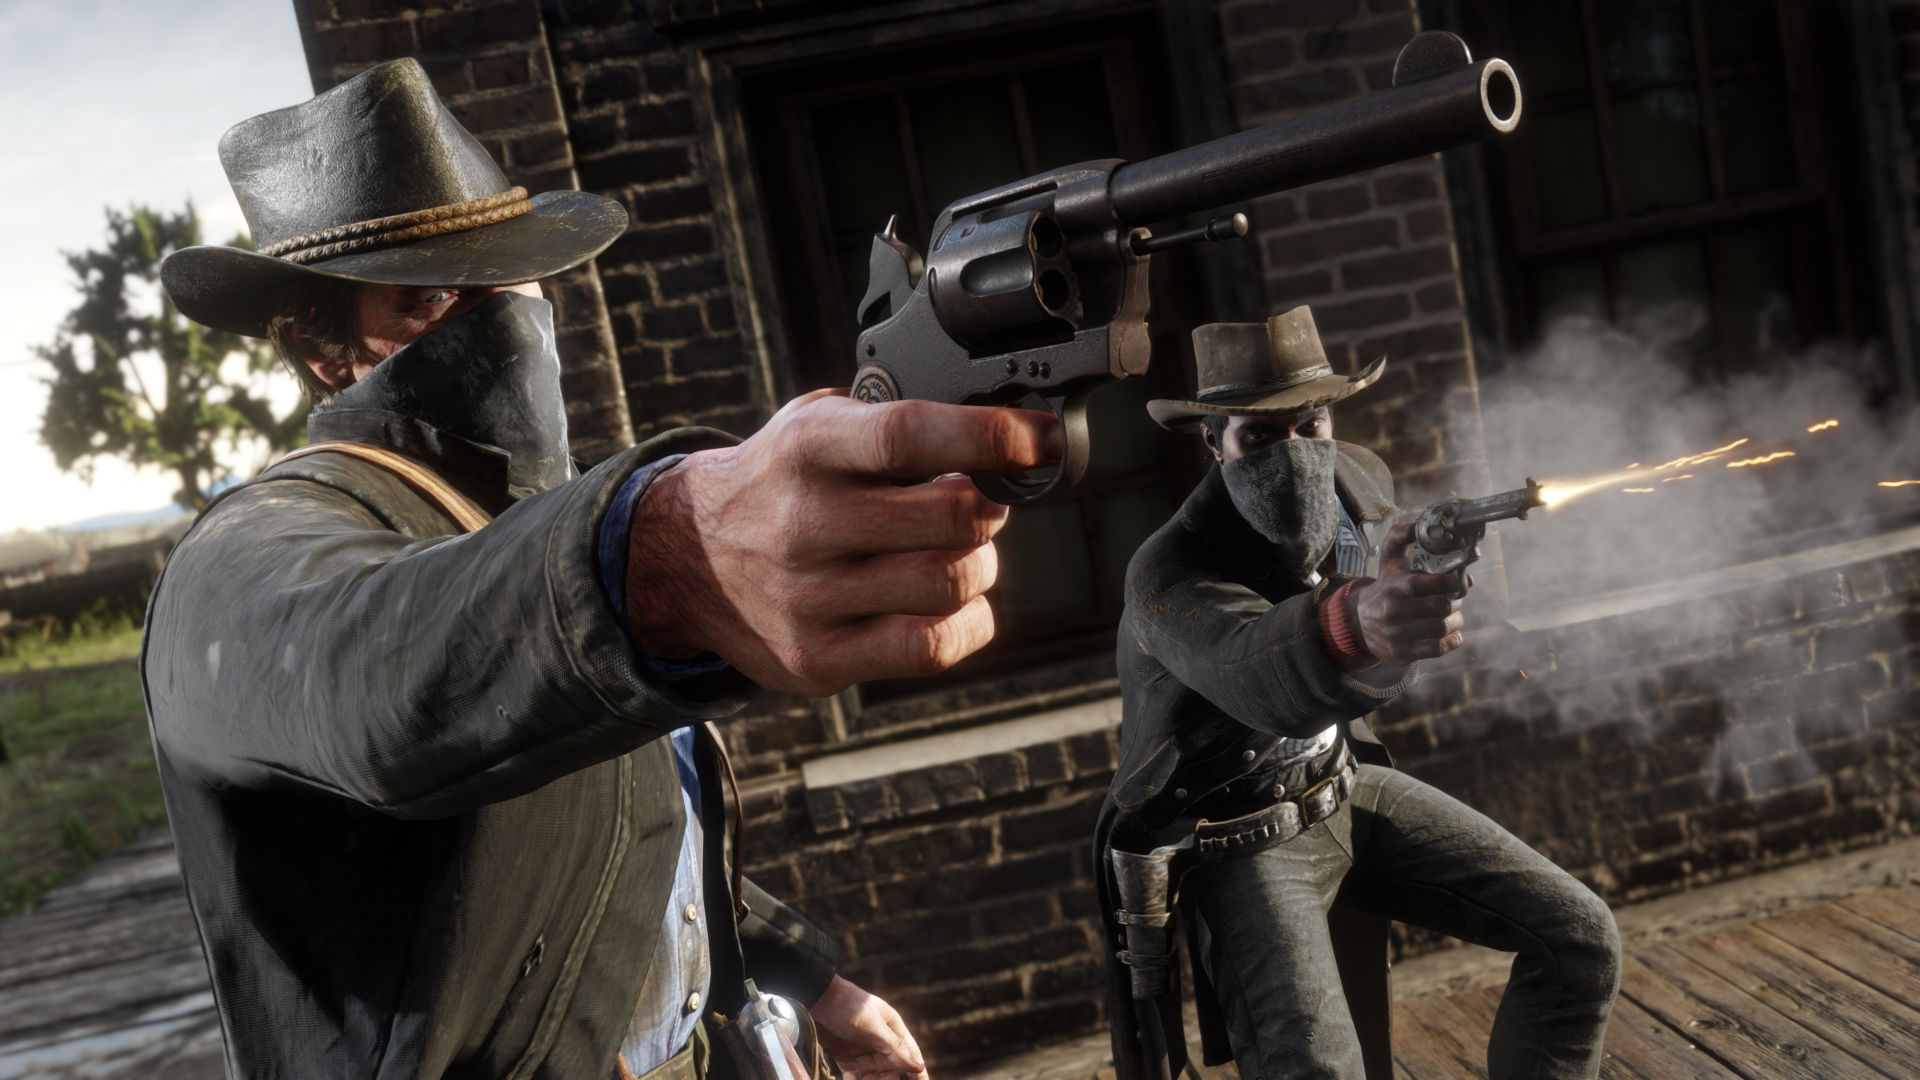 Red Dead Redemption 2 cheat codes: Two varmints hiding their faces with bandanas and shooting their revolvers. 